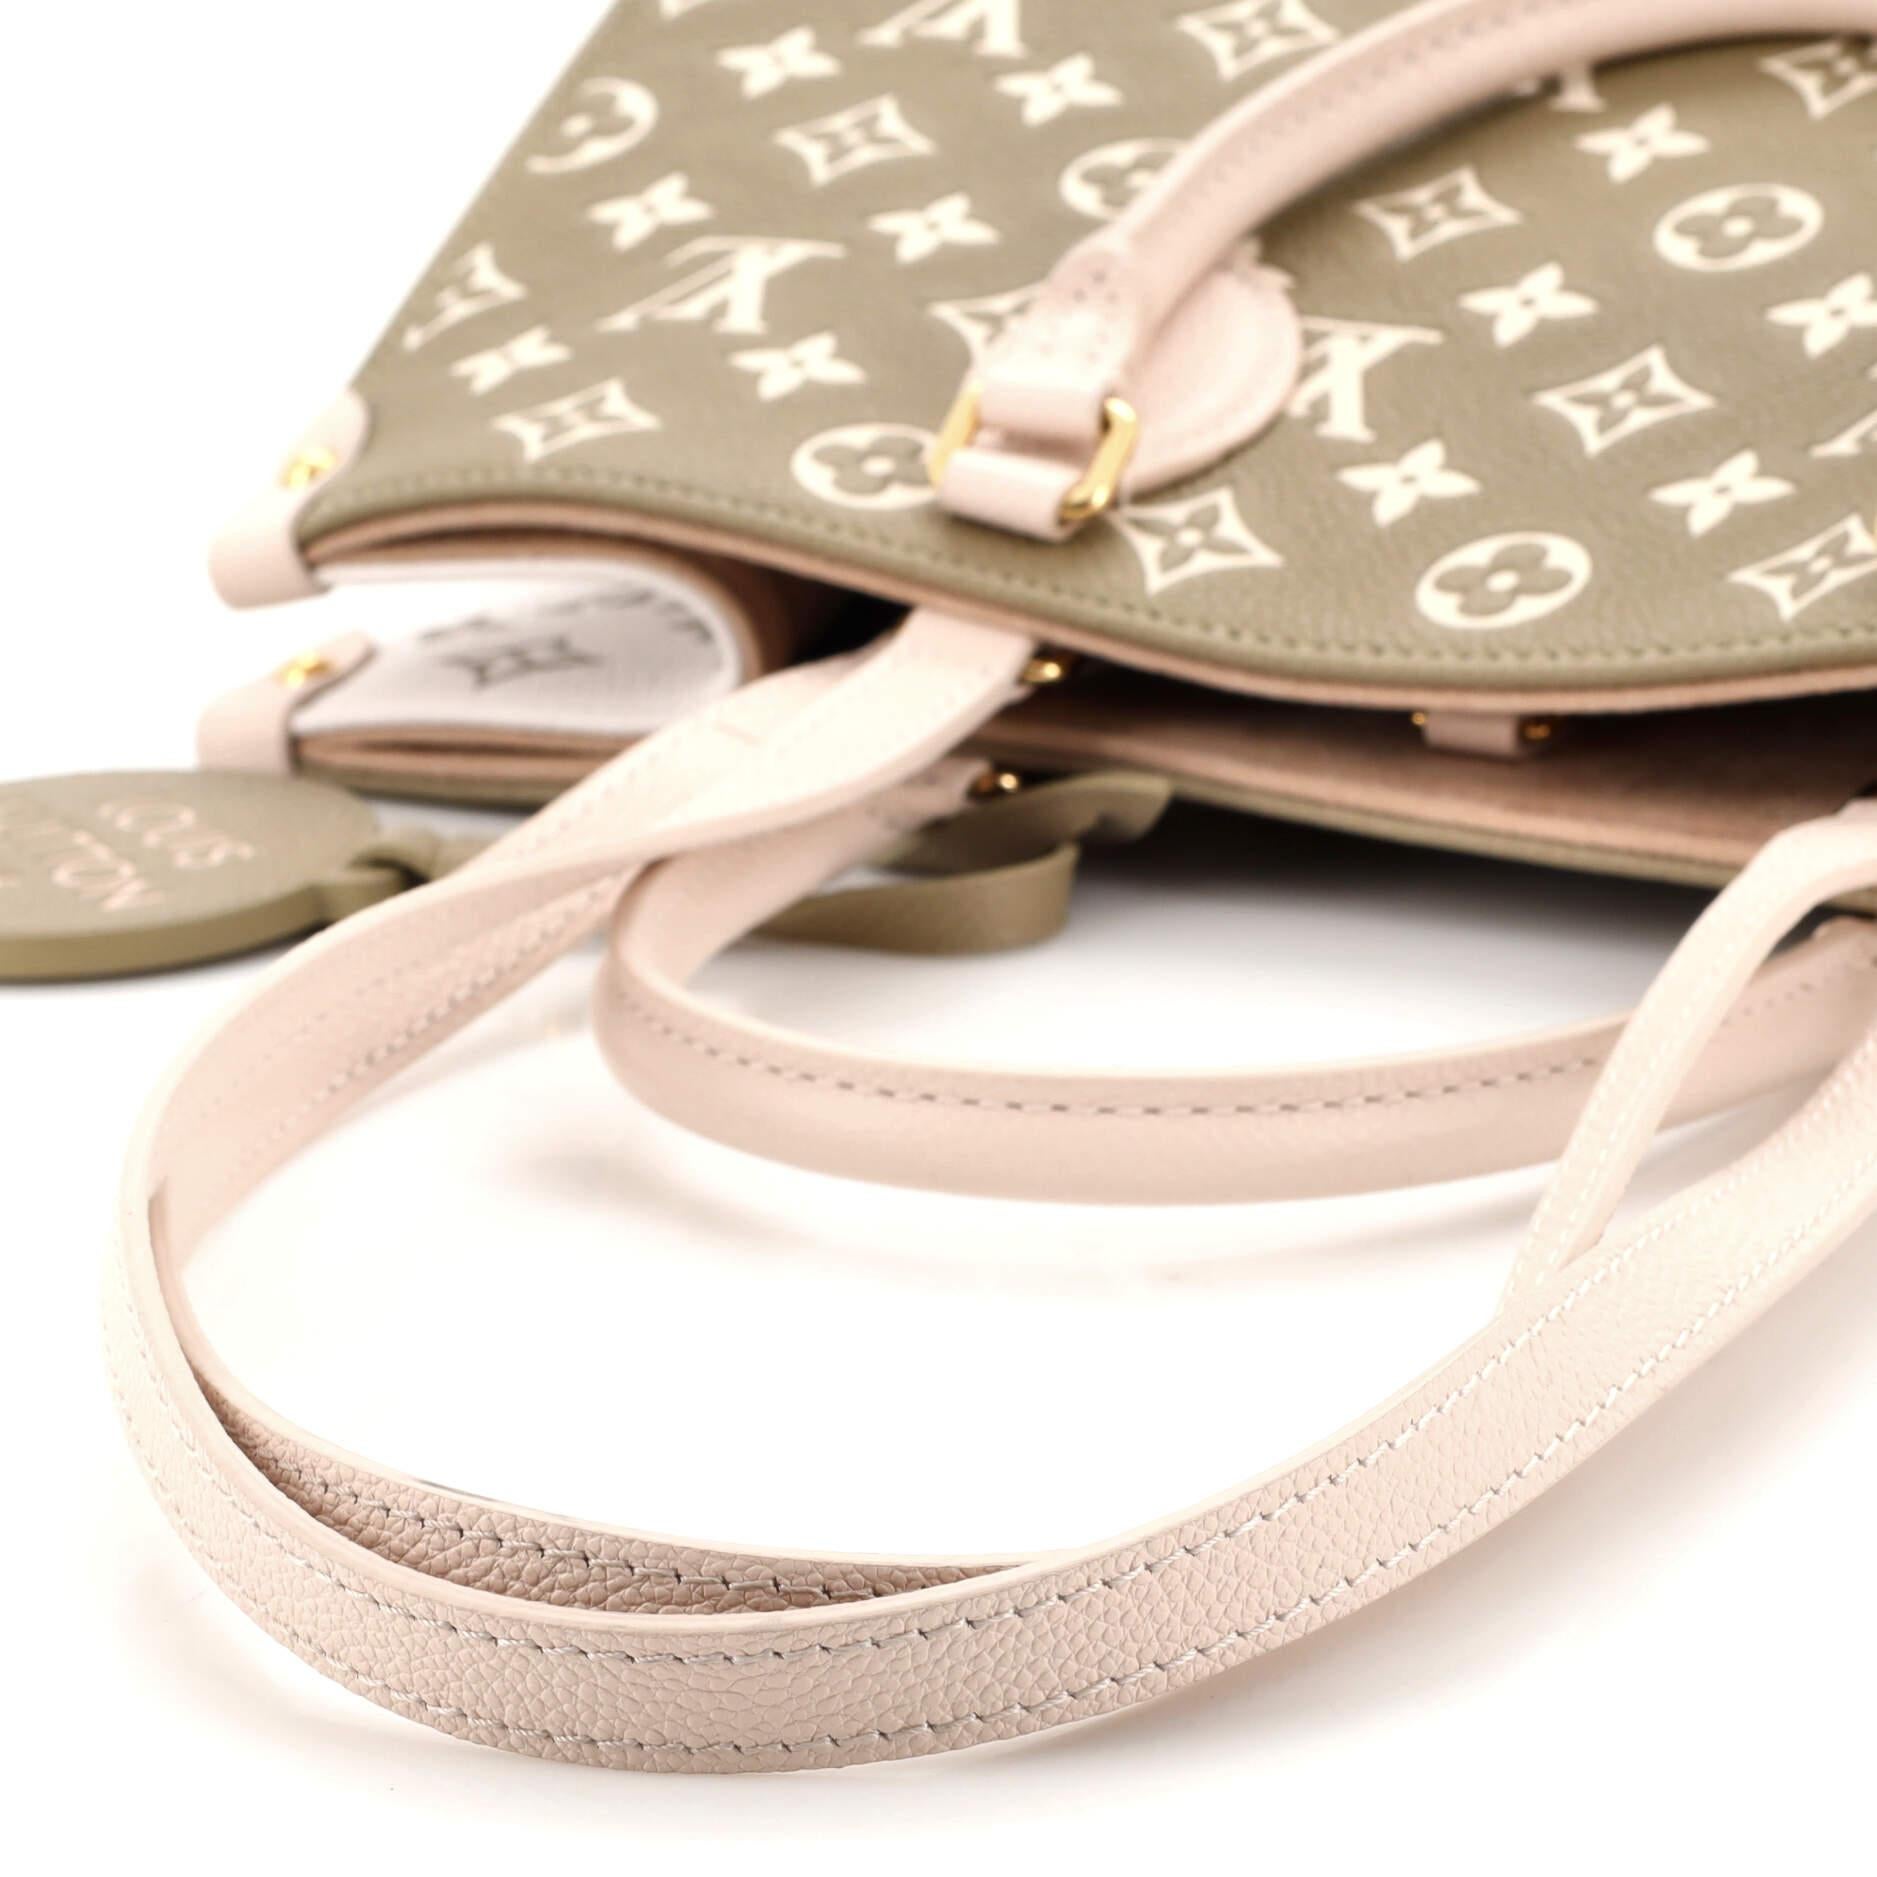 Louis Vuitton OnTheGo Tote Spring in the City Monogram Empreinte Leather MM 2